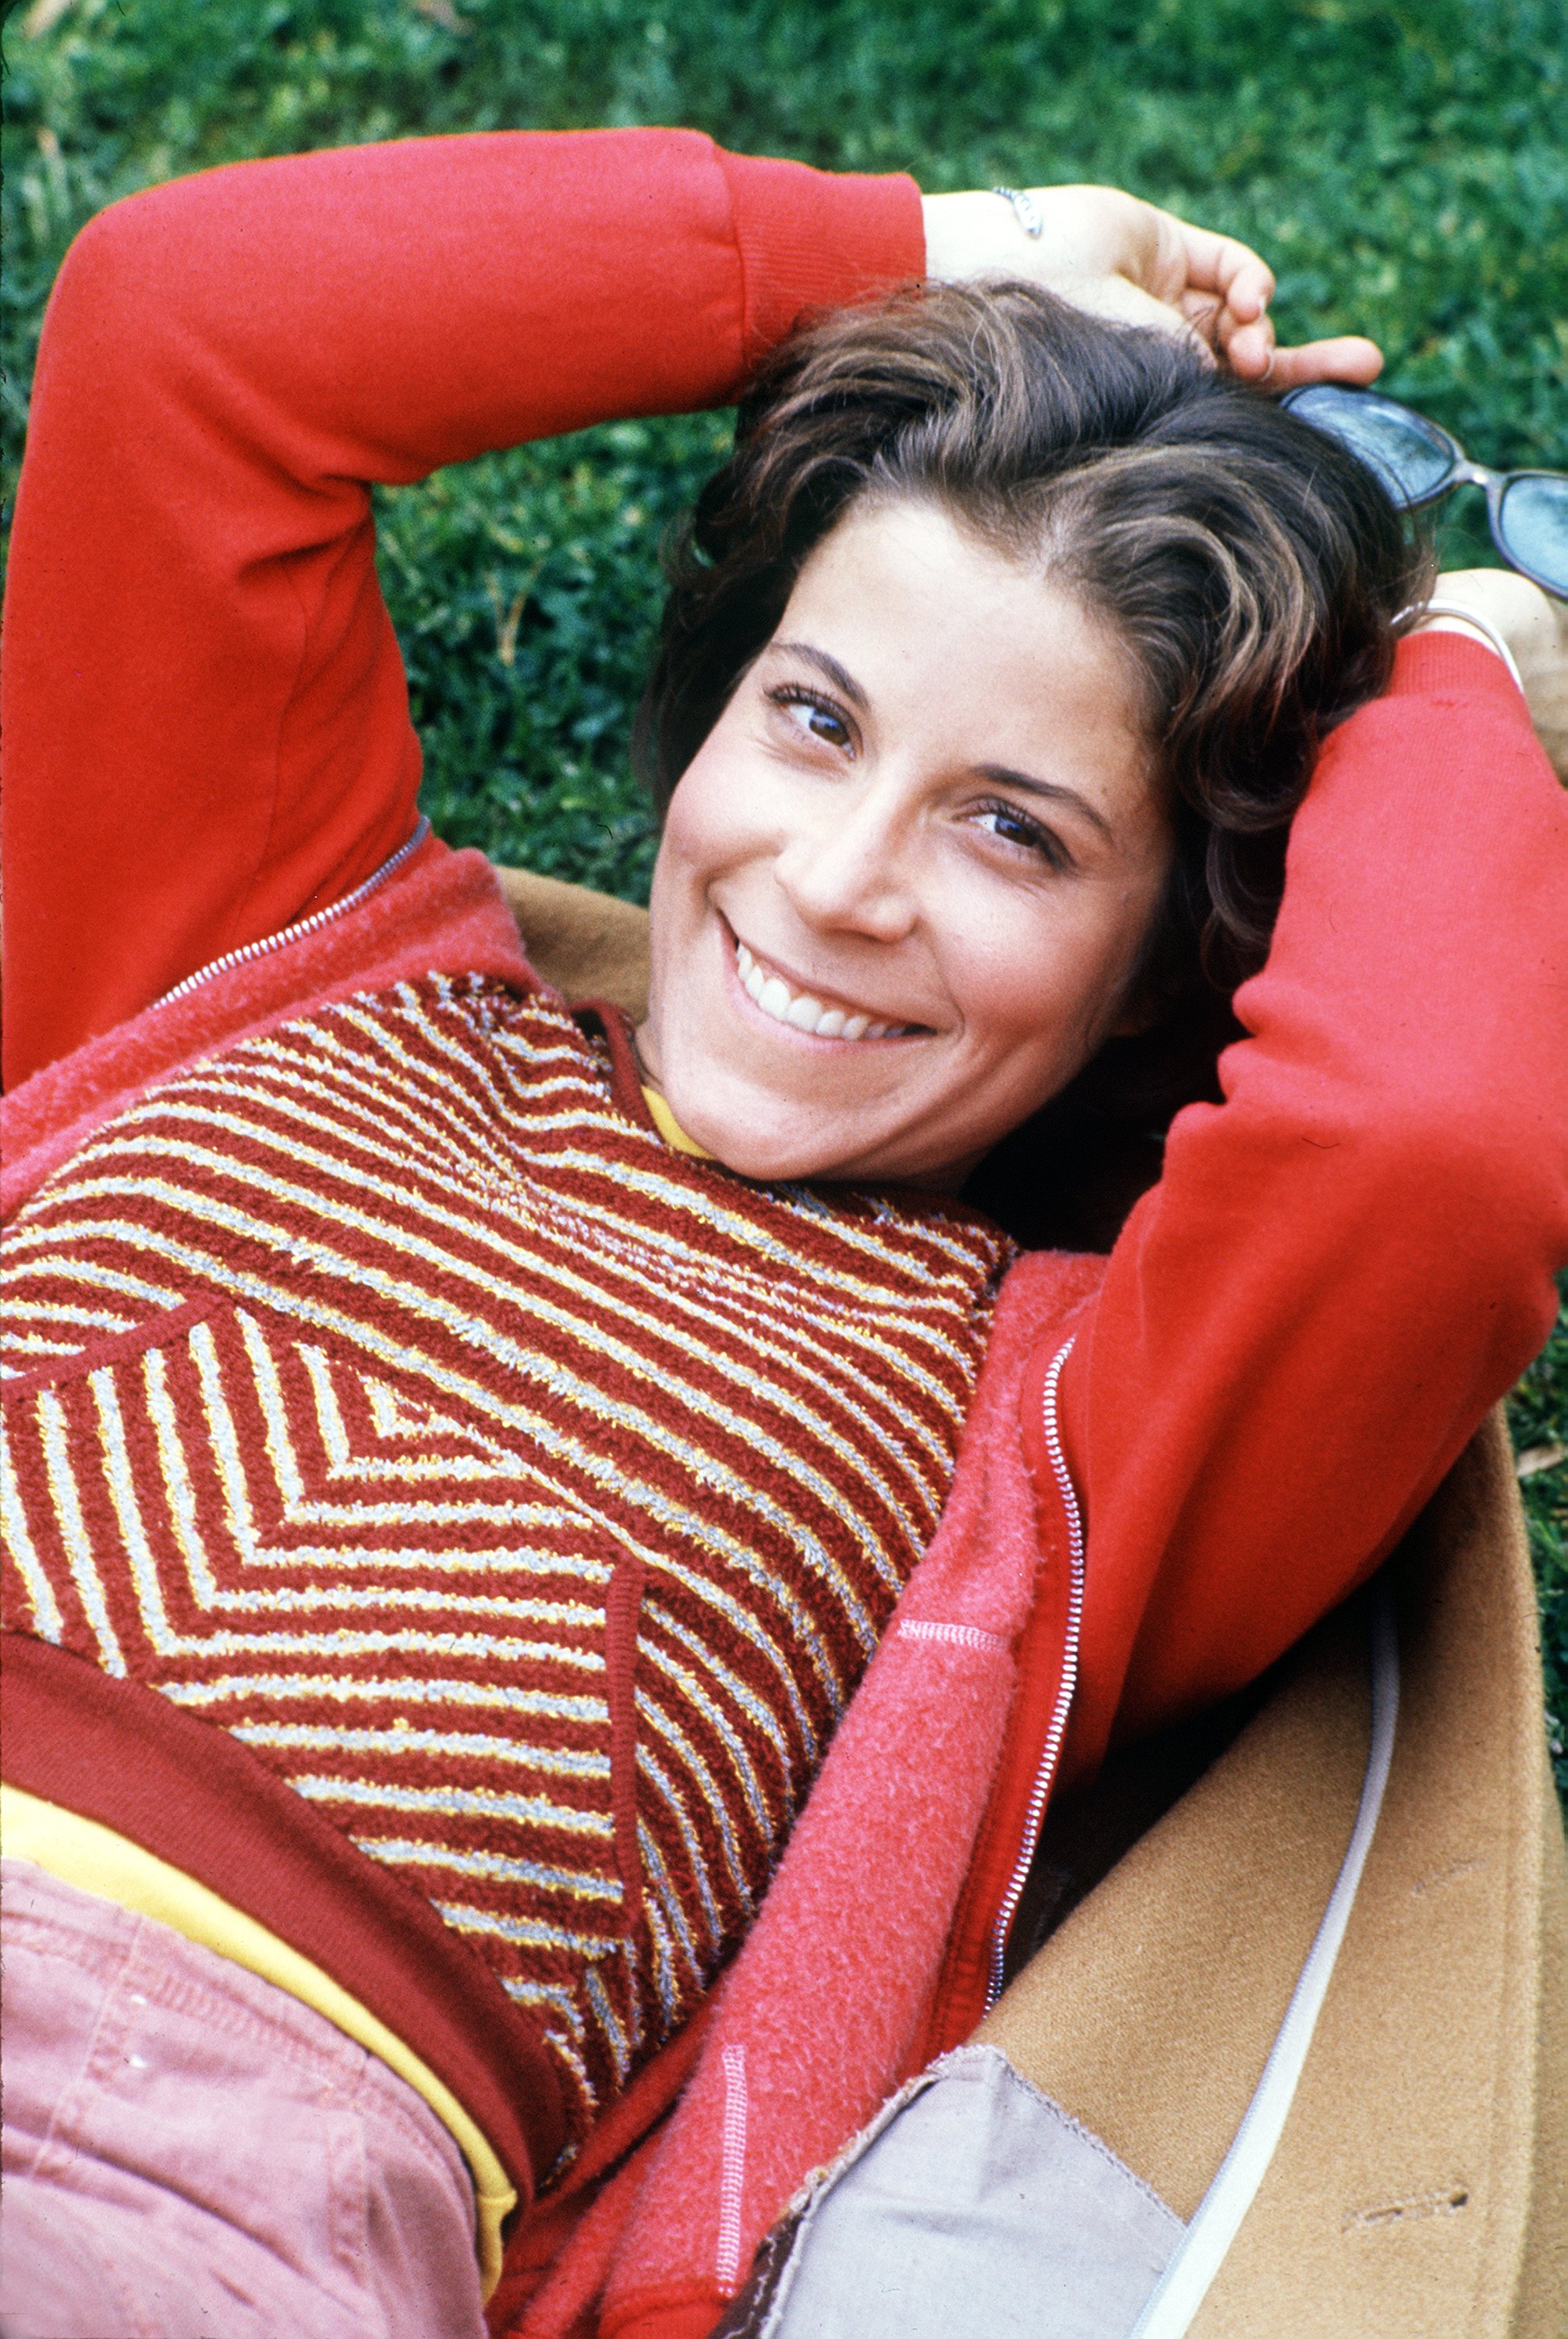 Lani O'Grady as Mary Bradford in "Eight Is Enough" | Source: Getty Images